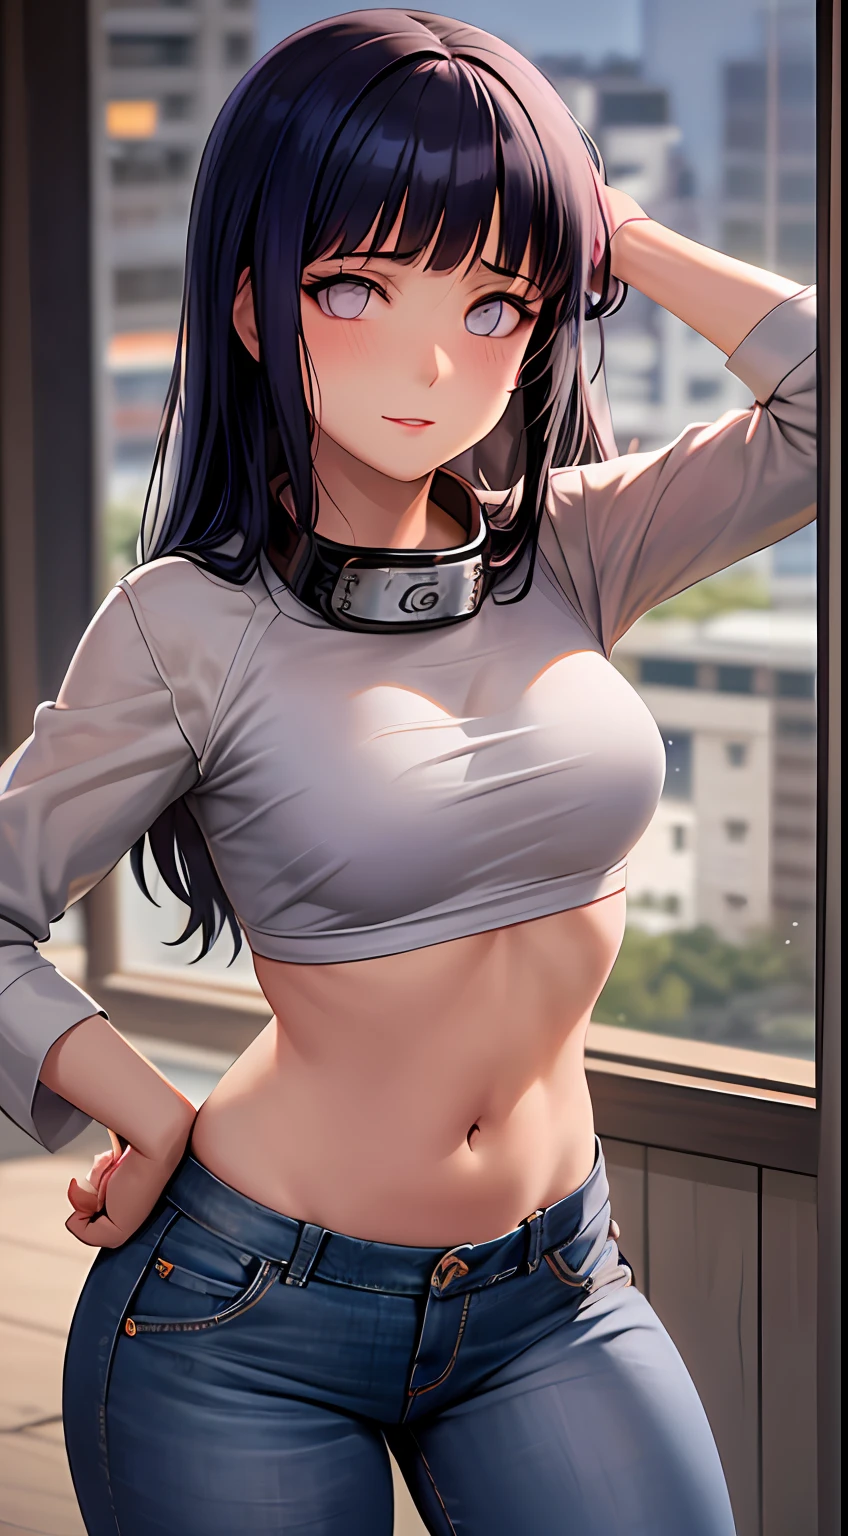 Masterpiece artwork, highres, high qualiy, face detailed, detailed body render, 1girl, standing alone, hyuuga hinata, hinata-sleevless-outfit, middlebreasts, shorth hair, Small thorax, wide hip, thick-thighs, wearing no shirt, No blouse, fully body, belly out, top, fishing net top, Dark lips, no-good, Breasts Out, Dope, standingn, Blushes, (in the bedroom), tight jeans